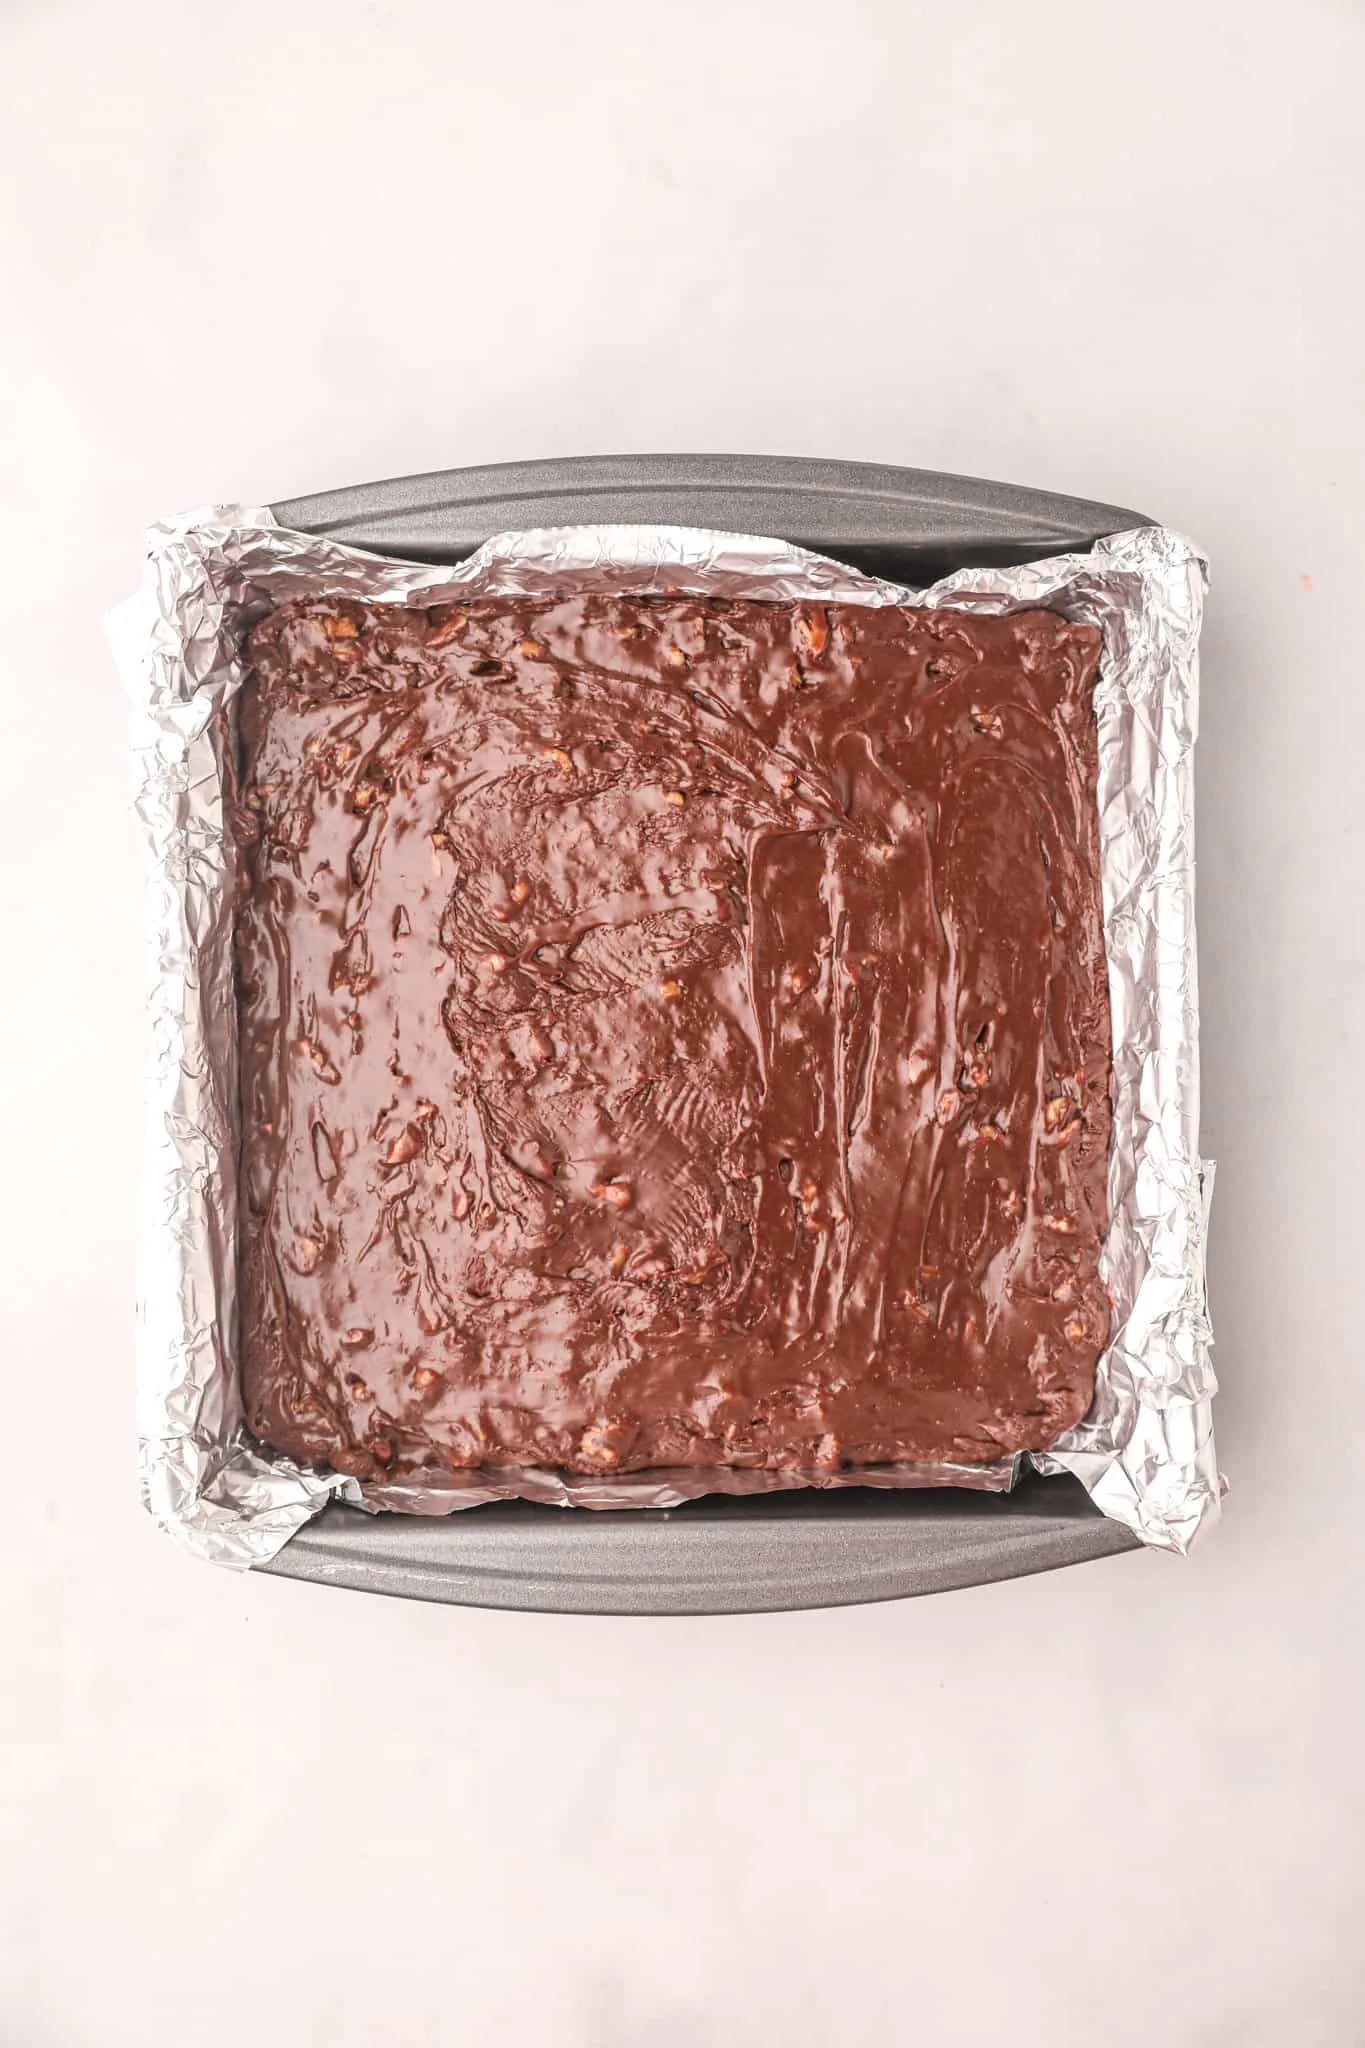 chocolate walnut fudge mixture in a foil lined pan